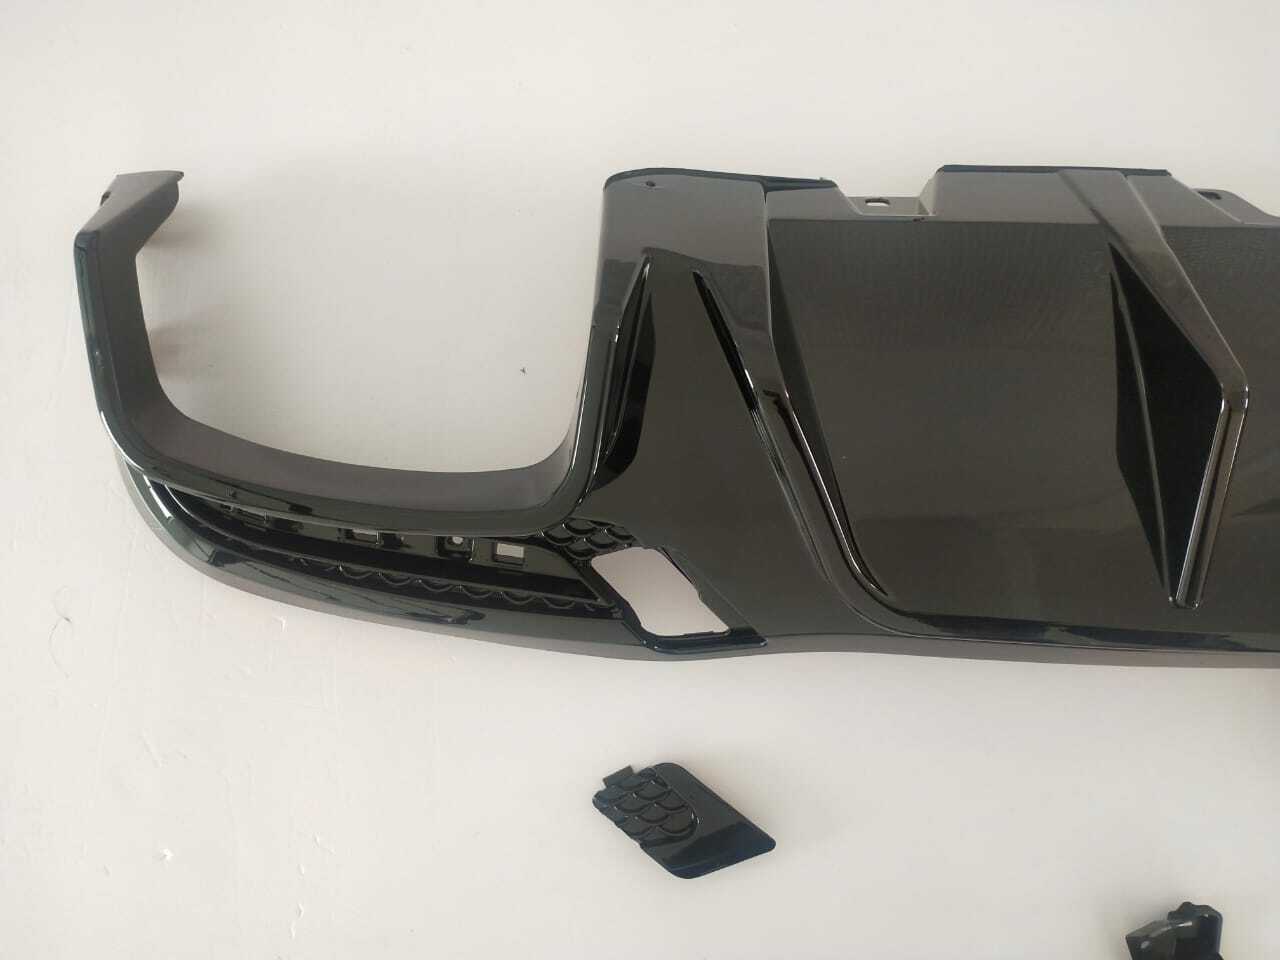 MERCEDES GLE GLS W166 X166 REAR DIFFUSER WITH LIGHT & TAILPIPES BLACK 2015-18